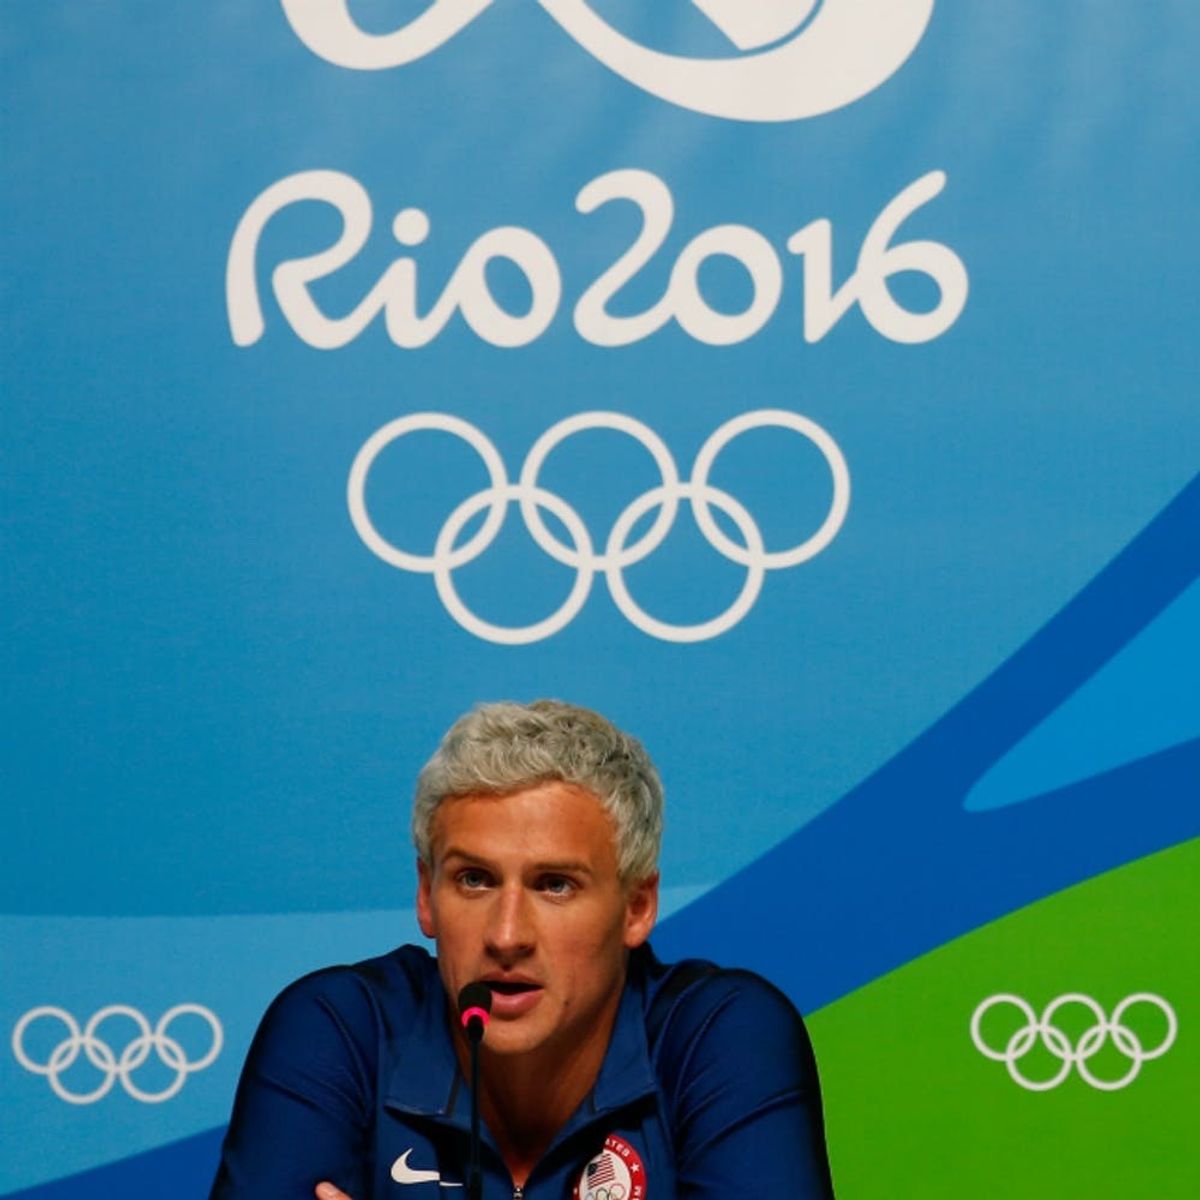 Here’s the Unbelievable Update on Ryan Lochte’s Robbery Story